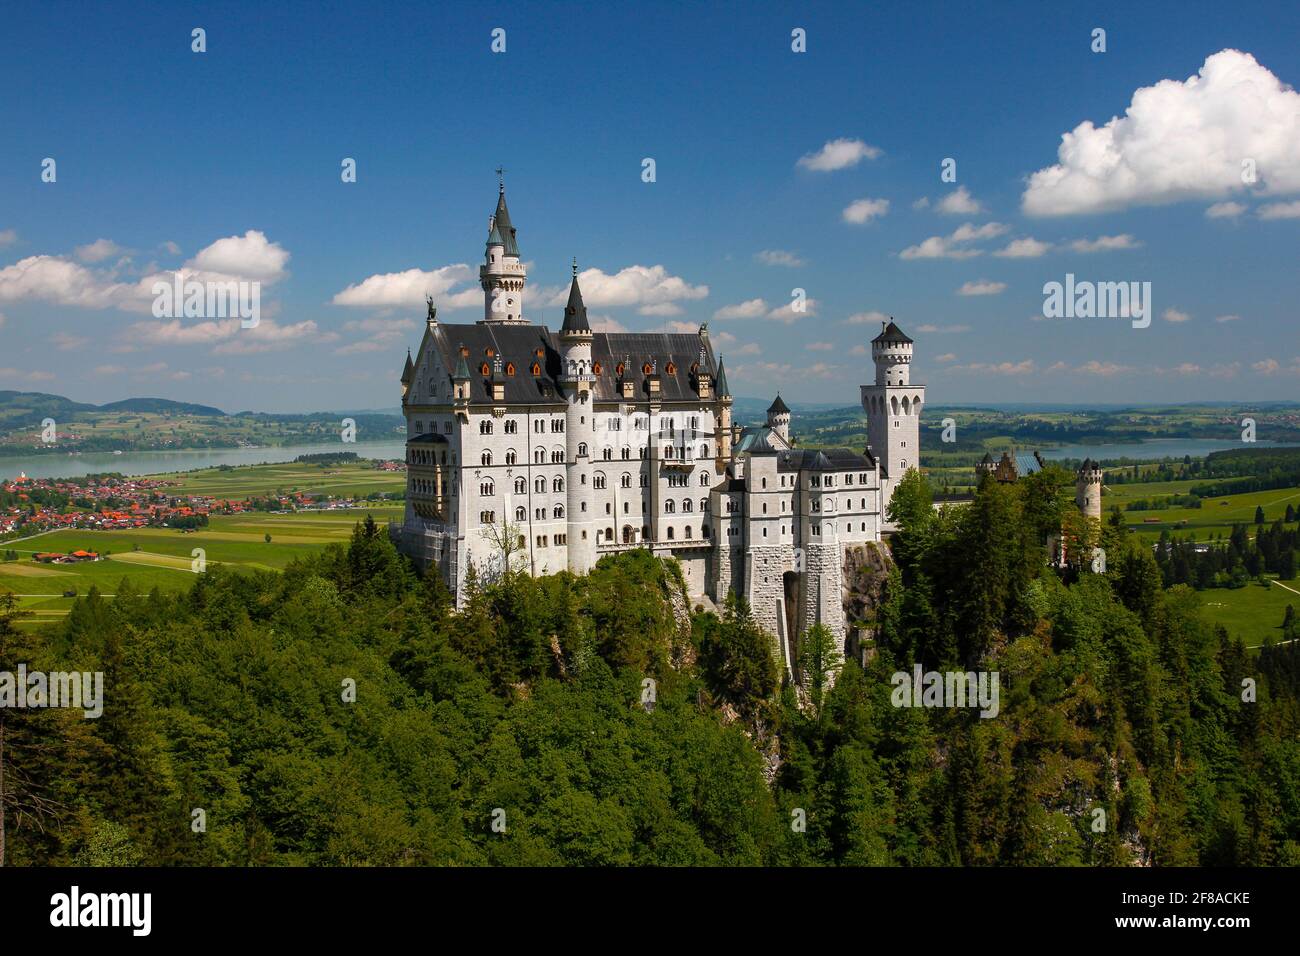 Fairytale Neuschwanstein Castle Perched on Green Mountain with Bright Blue Sky, Bavaria, Germany Stock Photo